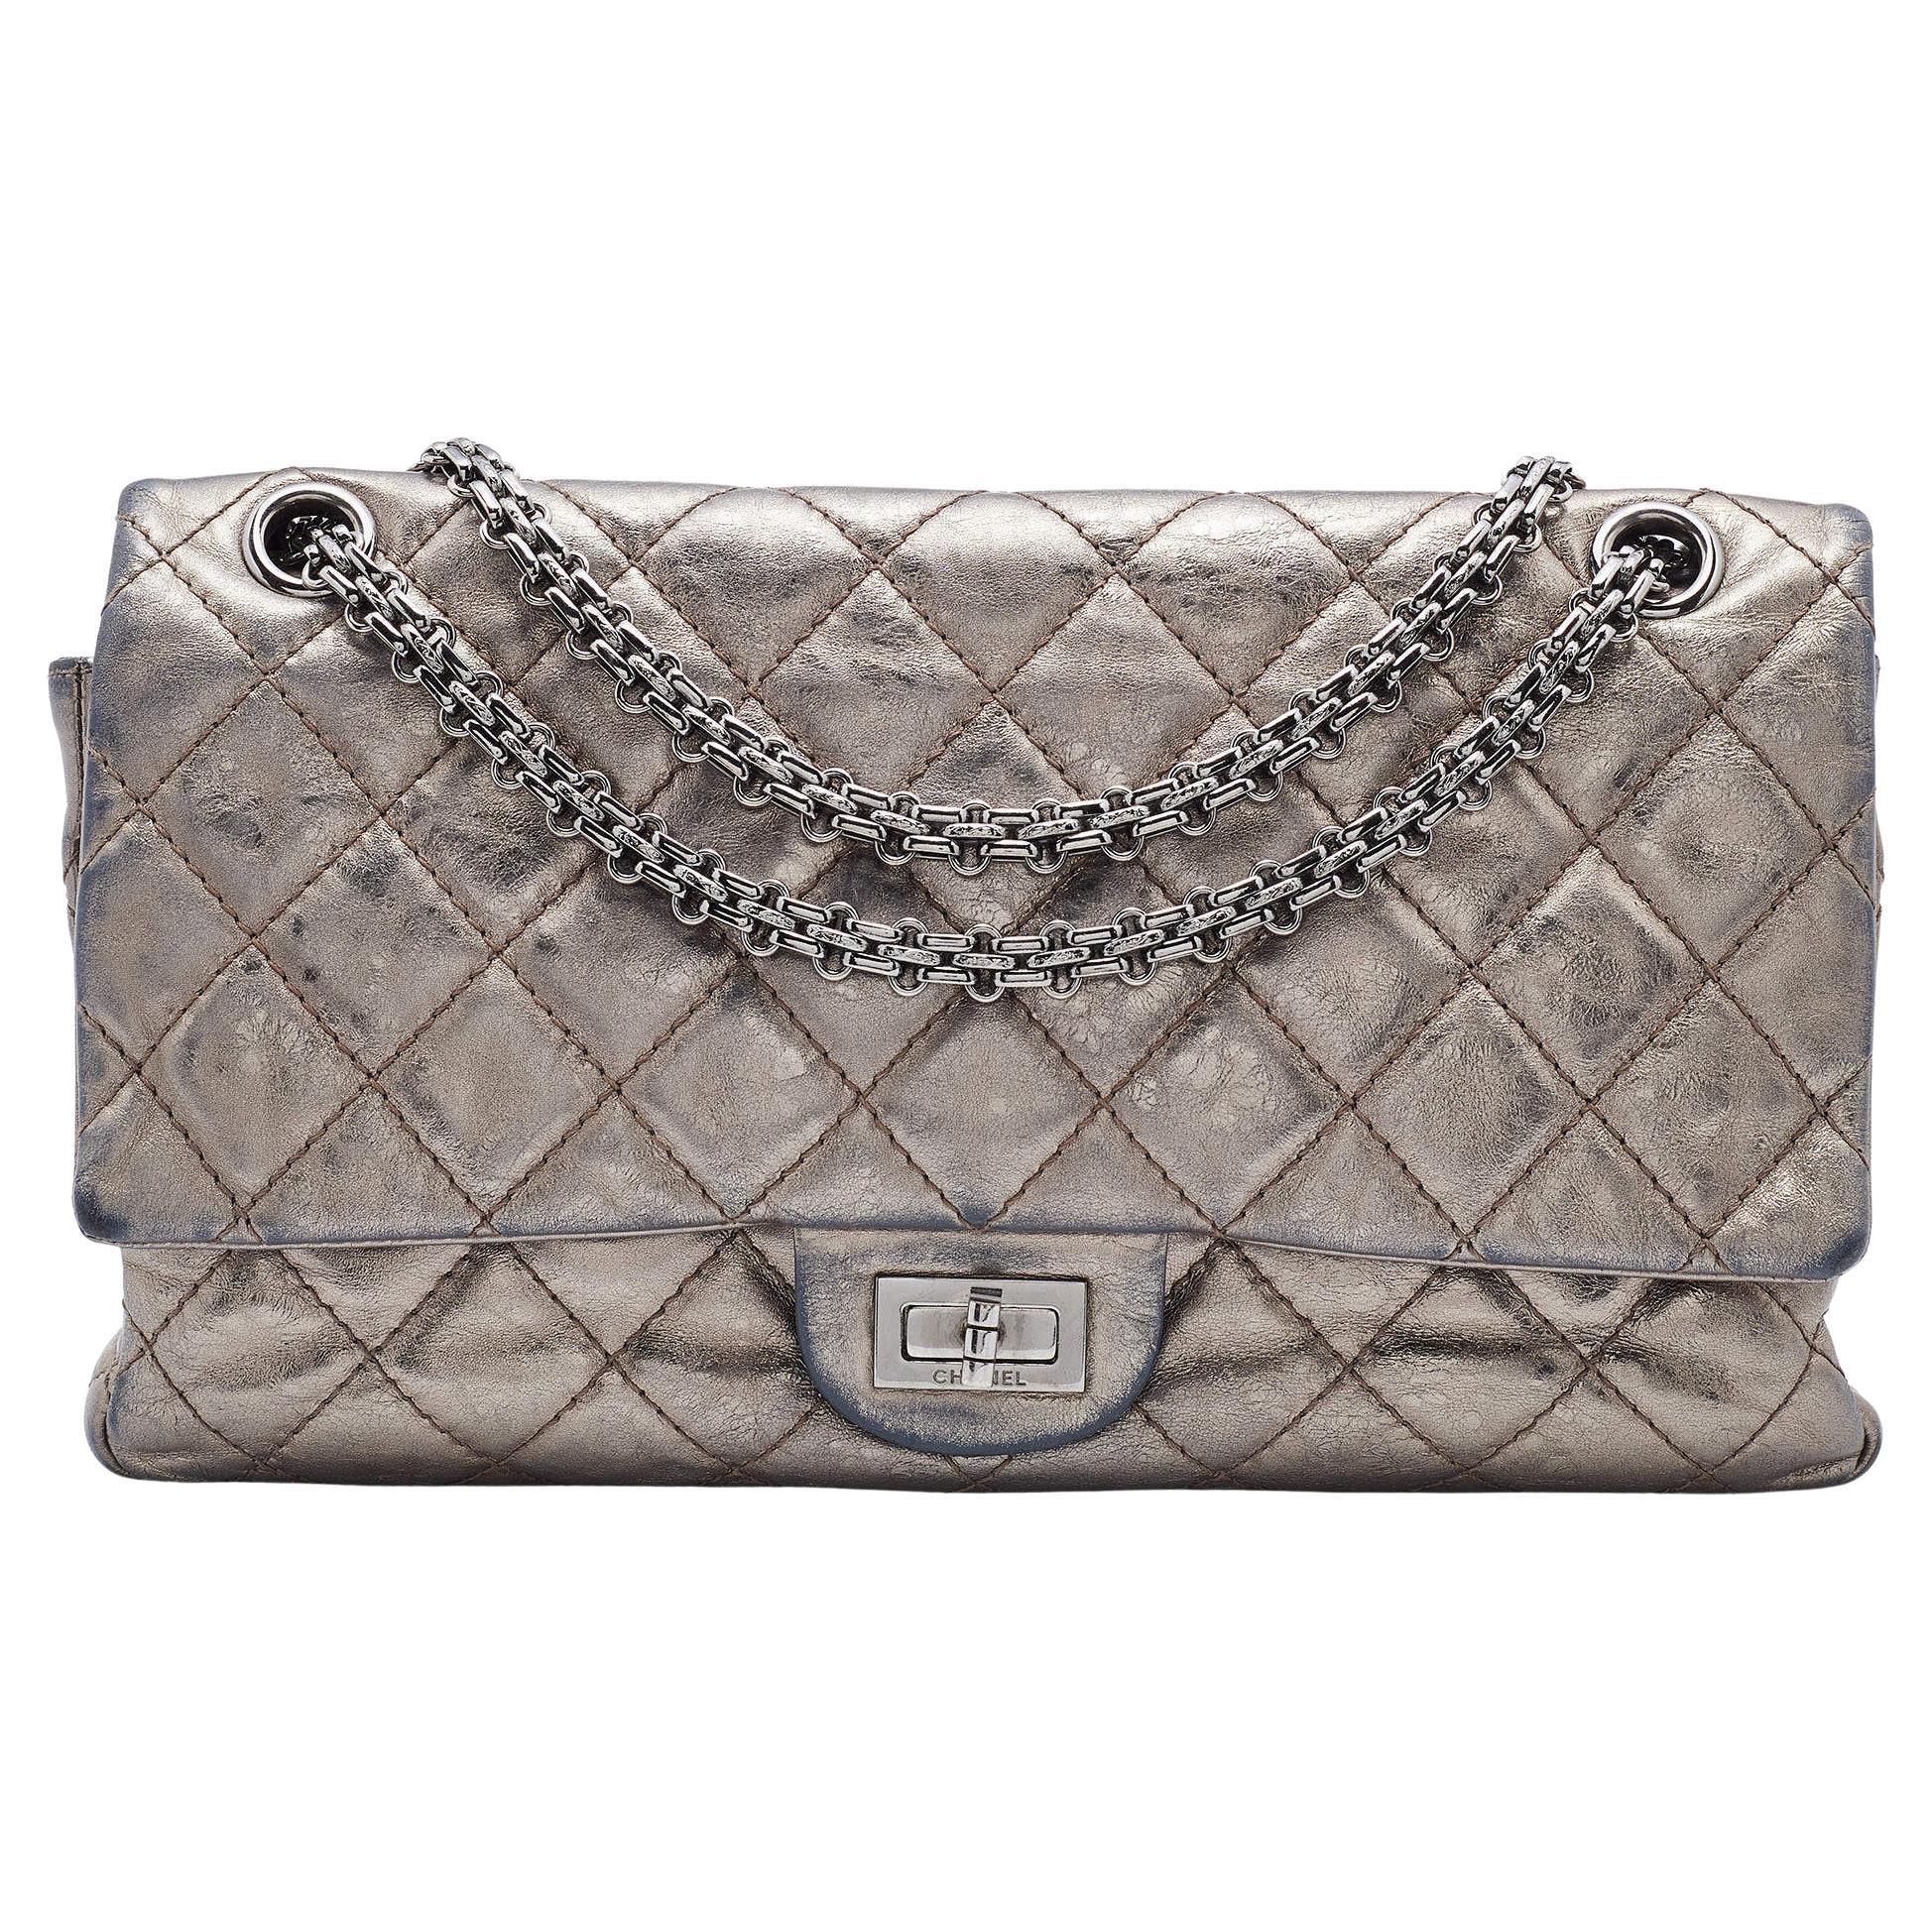 Chanel Metallic Grey Quilted Leather Reissue 2.55 Classic 226 Flap Bag For Sale